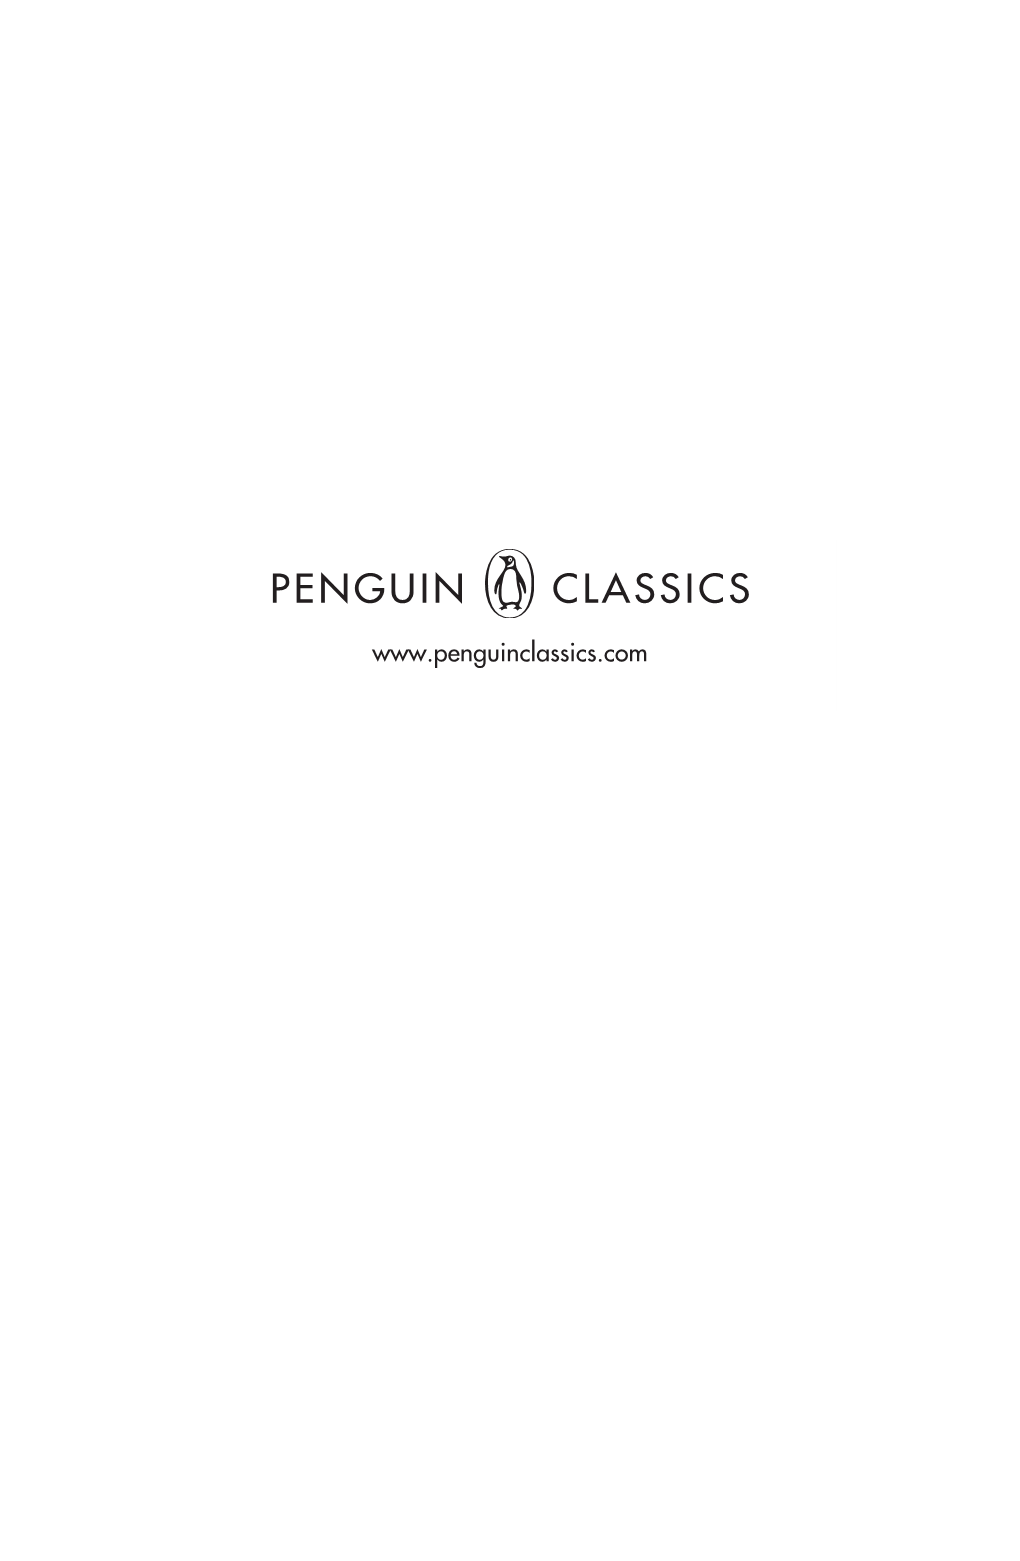 Pengclass12pi-178.Indd 1 11/29/11 10:34 AM Pengclass12pi-178.Indd 2 11/29/11 10:34 AM PENGUIN CLASSICS a Complete Annotated Listing